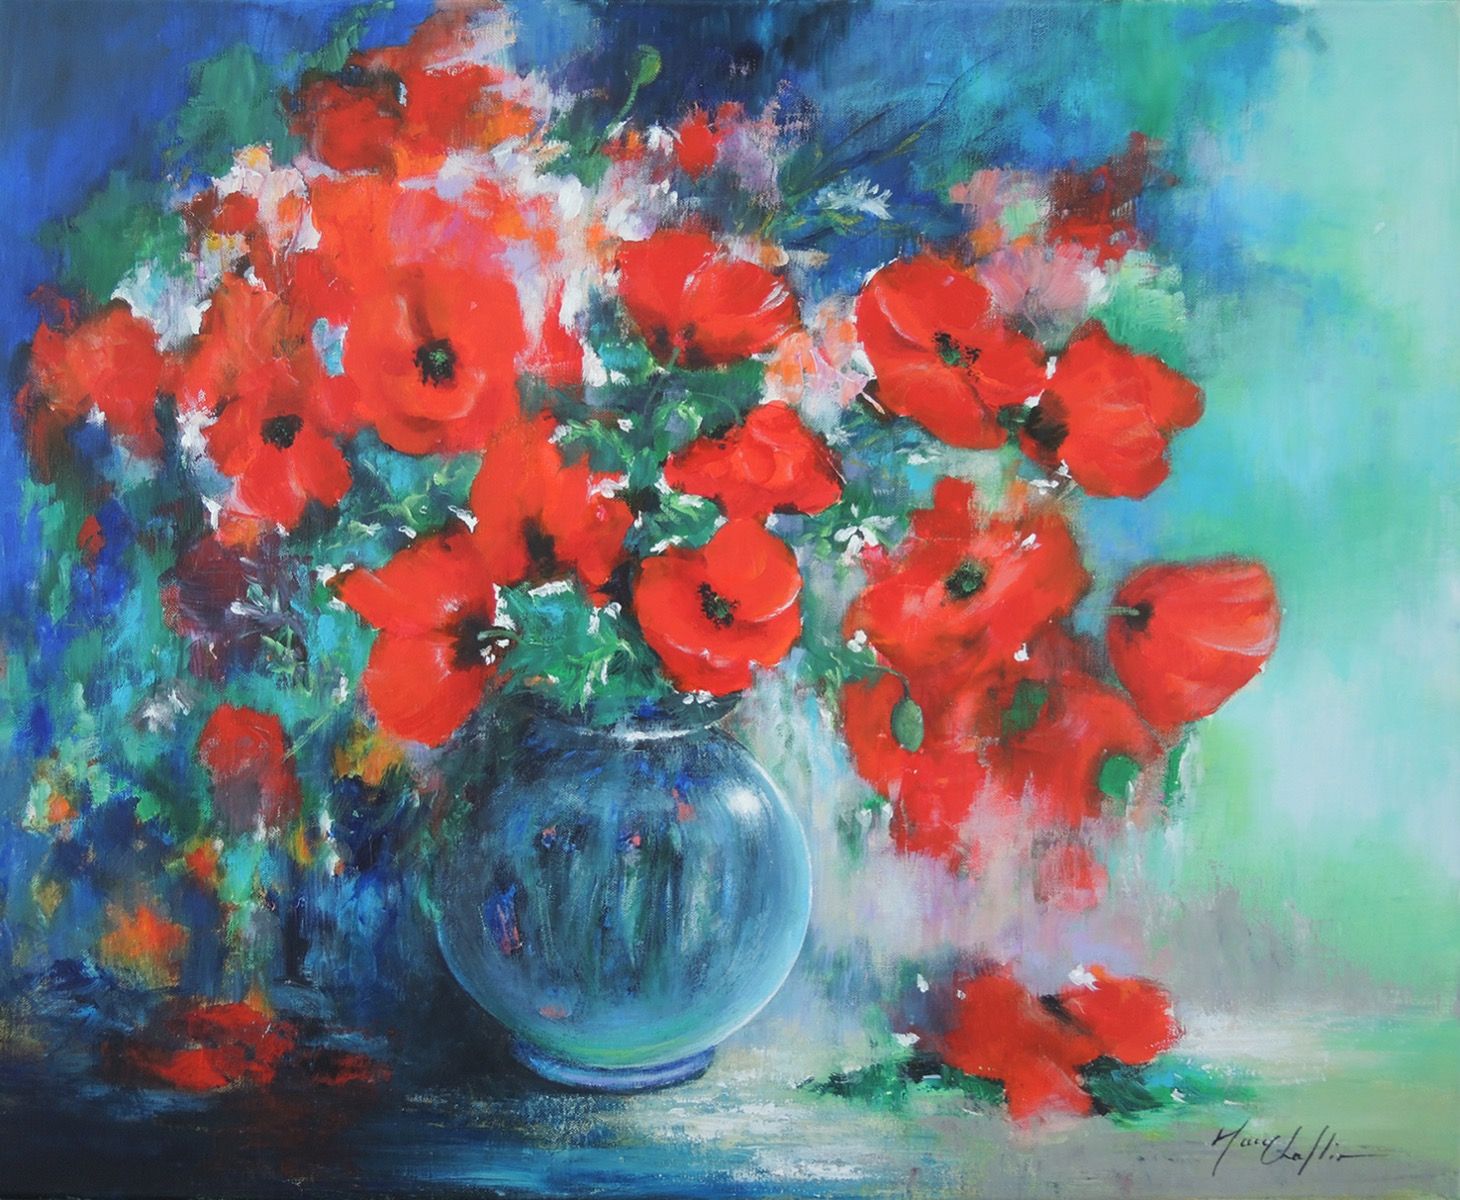 Bouquet of wild poppies by Mary Chaplin